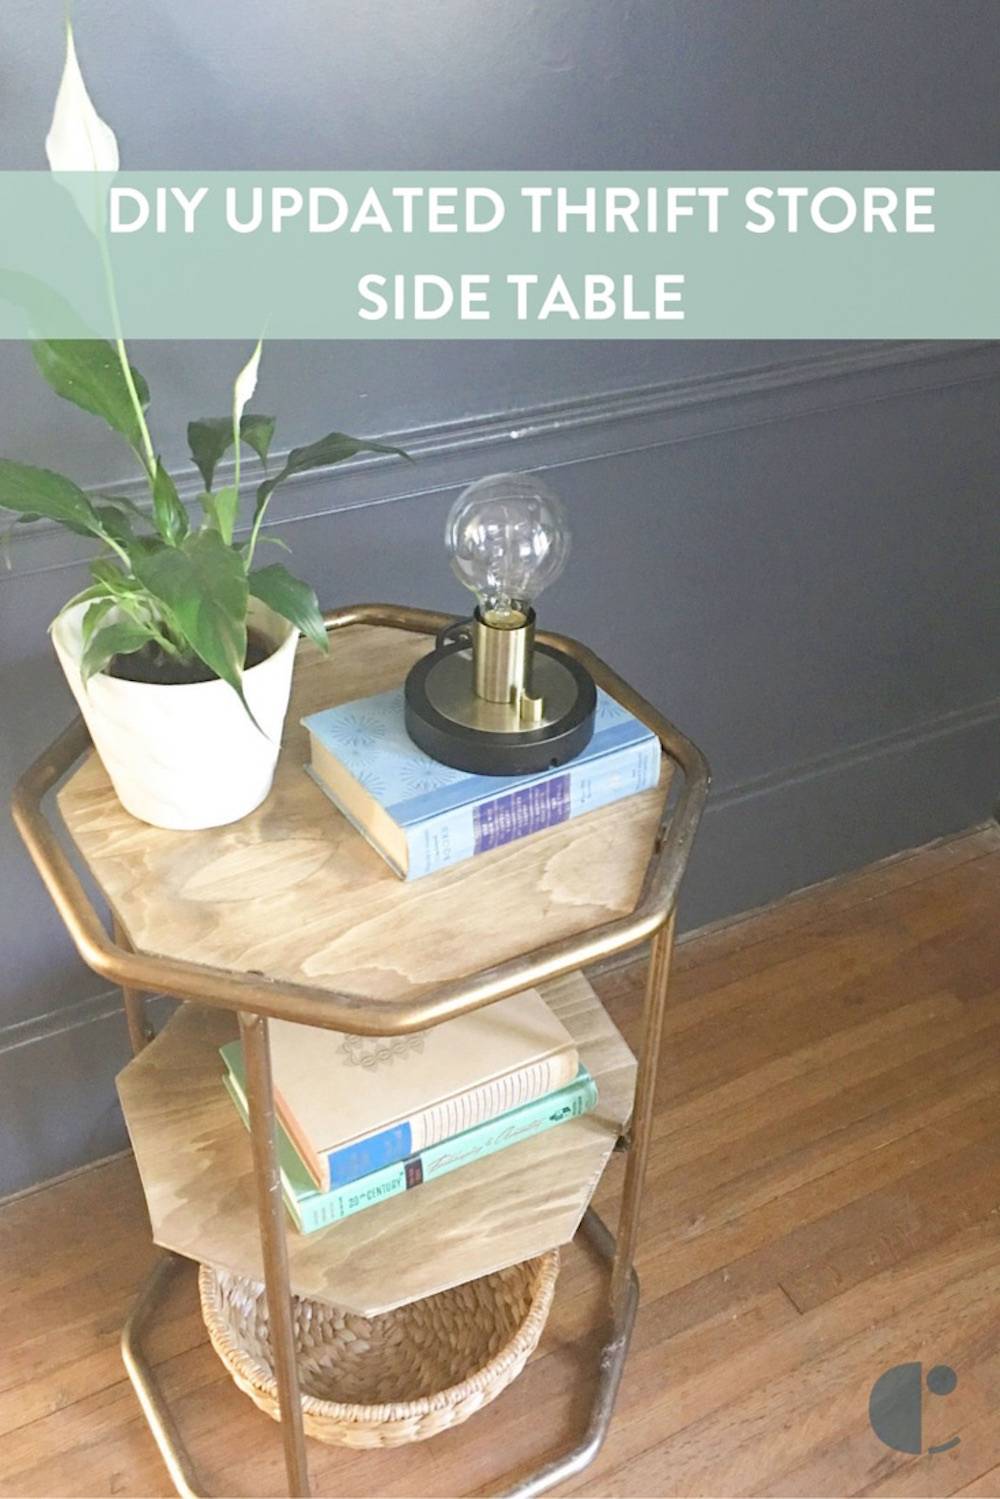 DIY Updated Thrift Store Side Table Pinnable Image